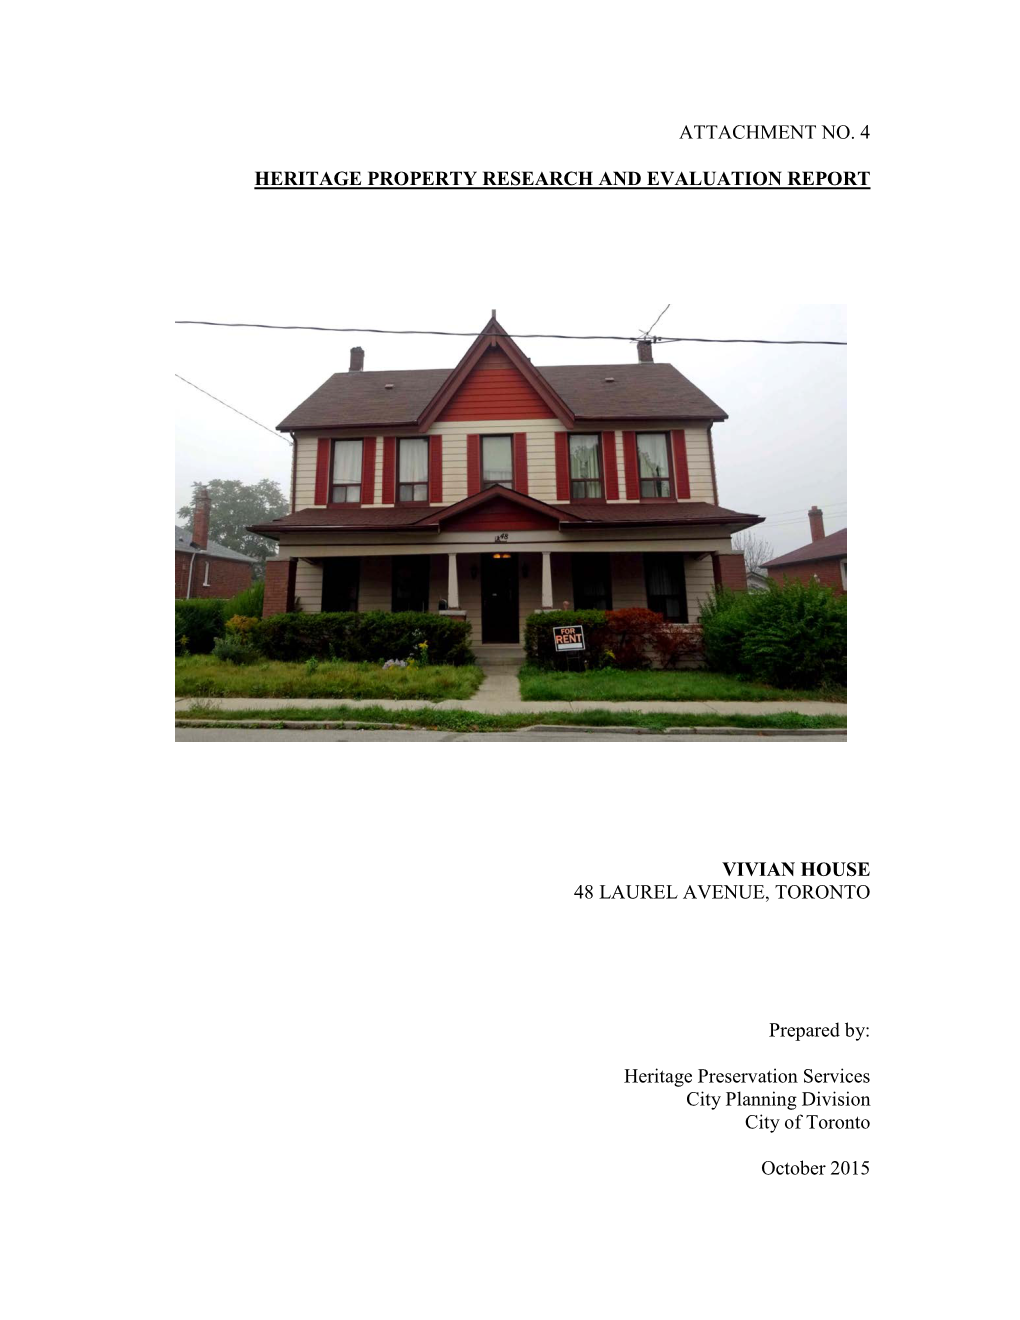 Heritage Property Research and Evaluation Report